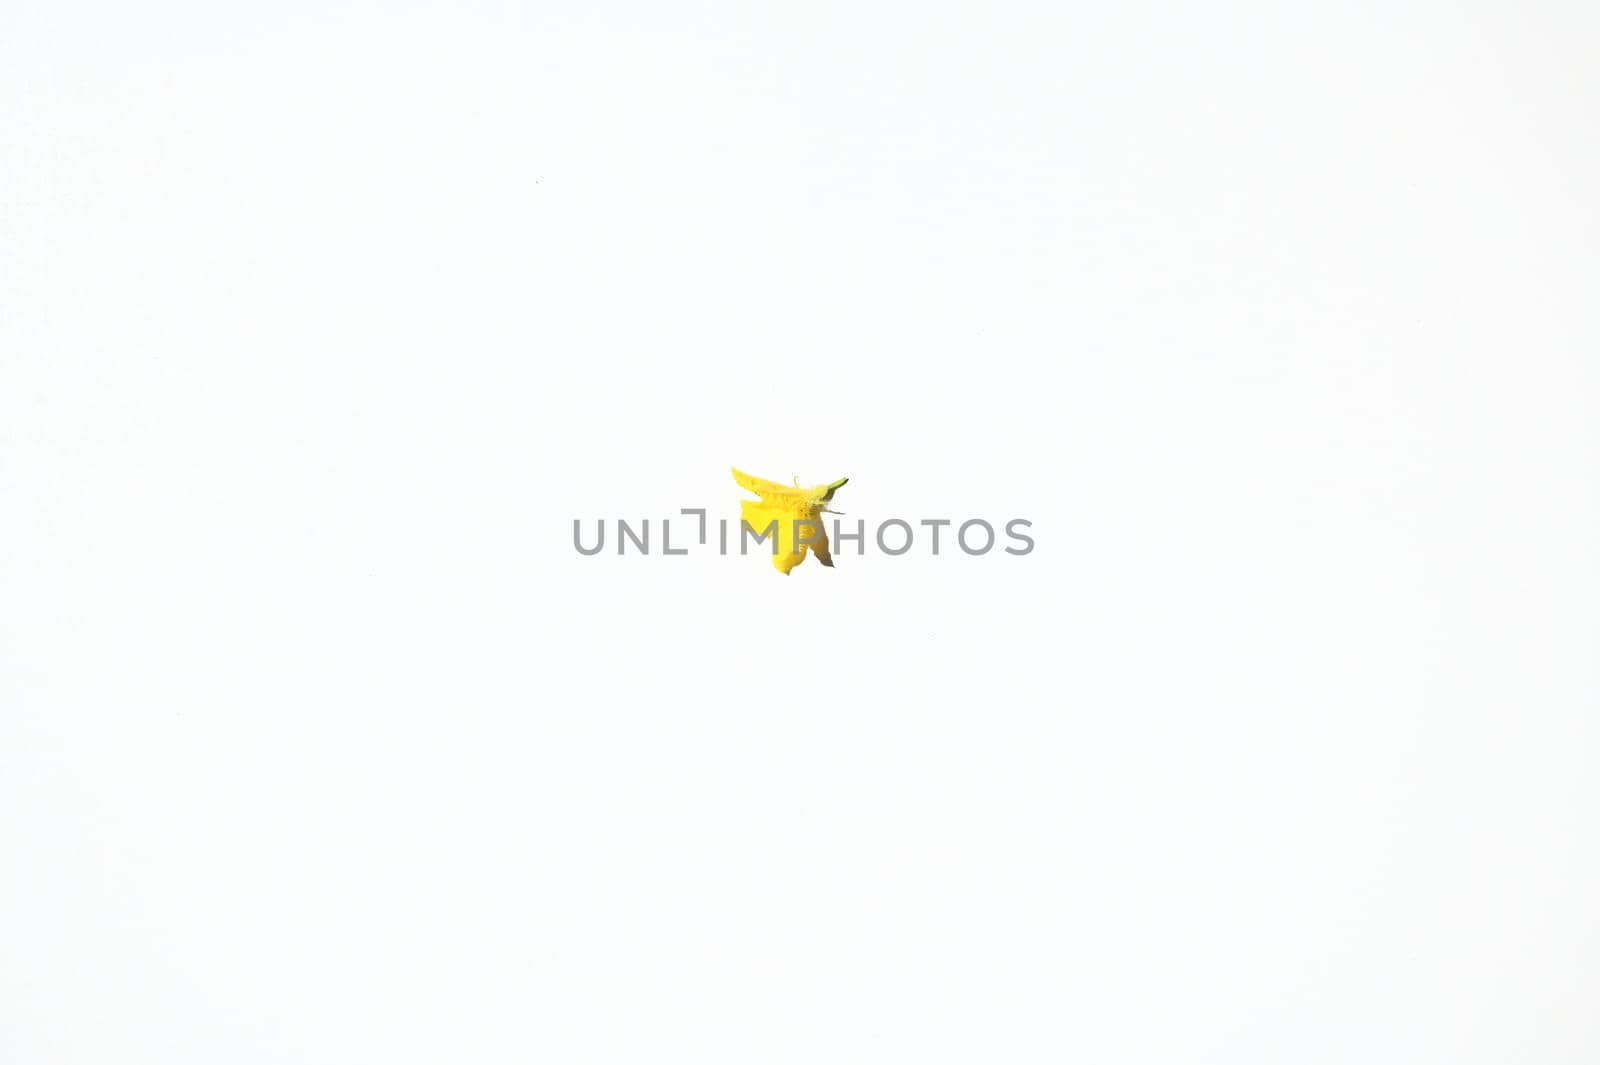 Flat lay. Top view. Horizontal photography. Studio shot of a single object- a yellow flower of blooming cucumber plant, isolated on white background with copy ad space for text or web banner